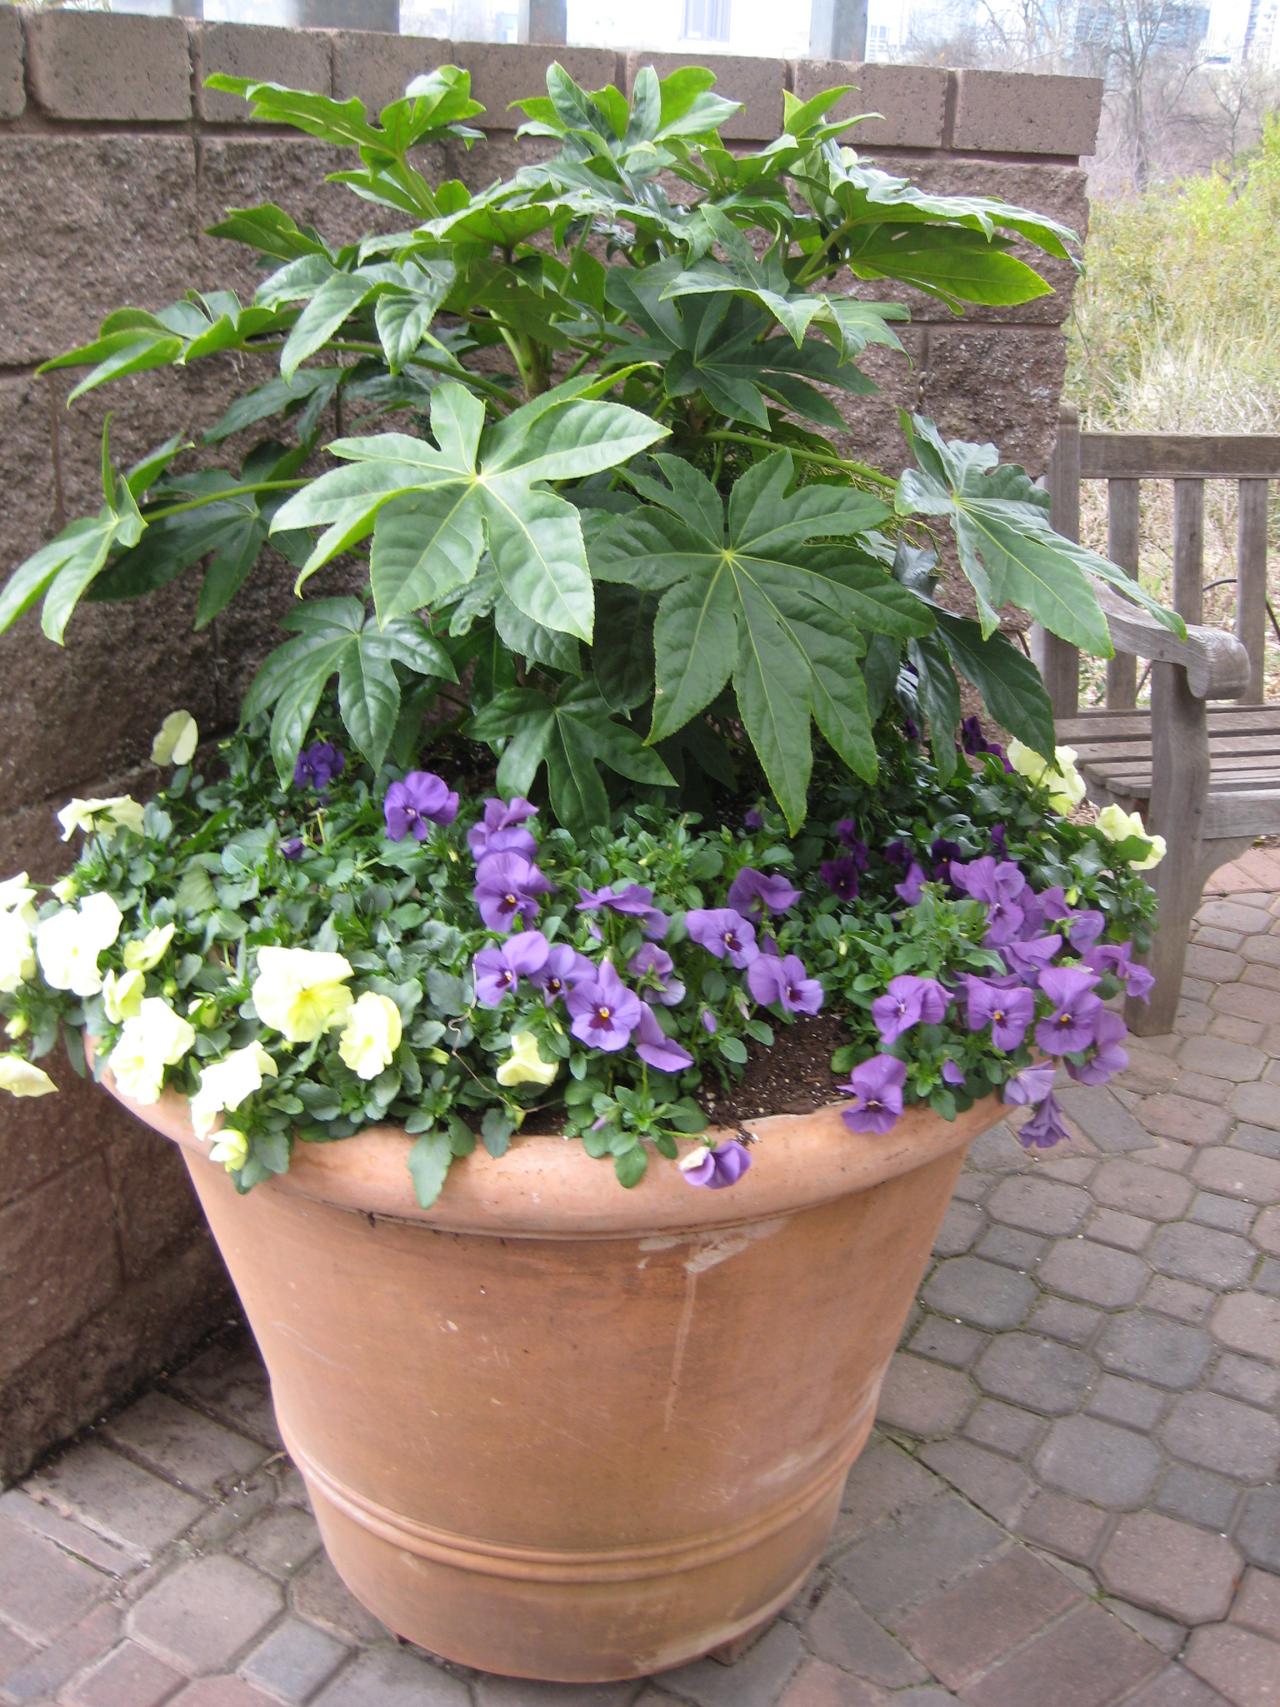 Evergreens Work Wonders In Containers, Patio Container Planting Ideas